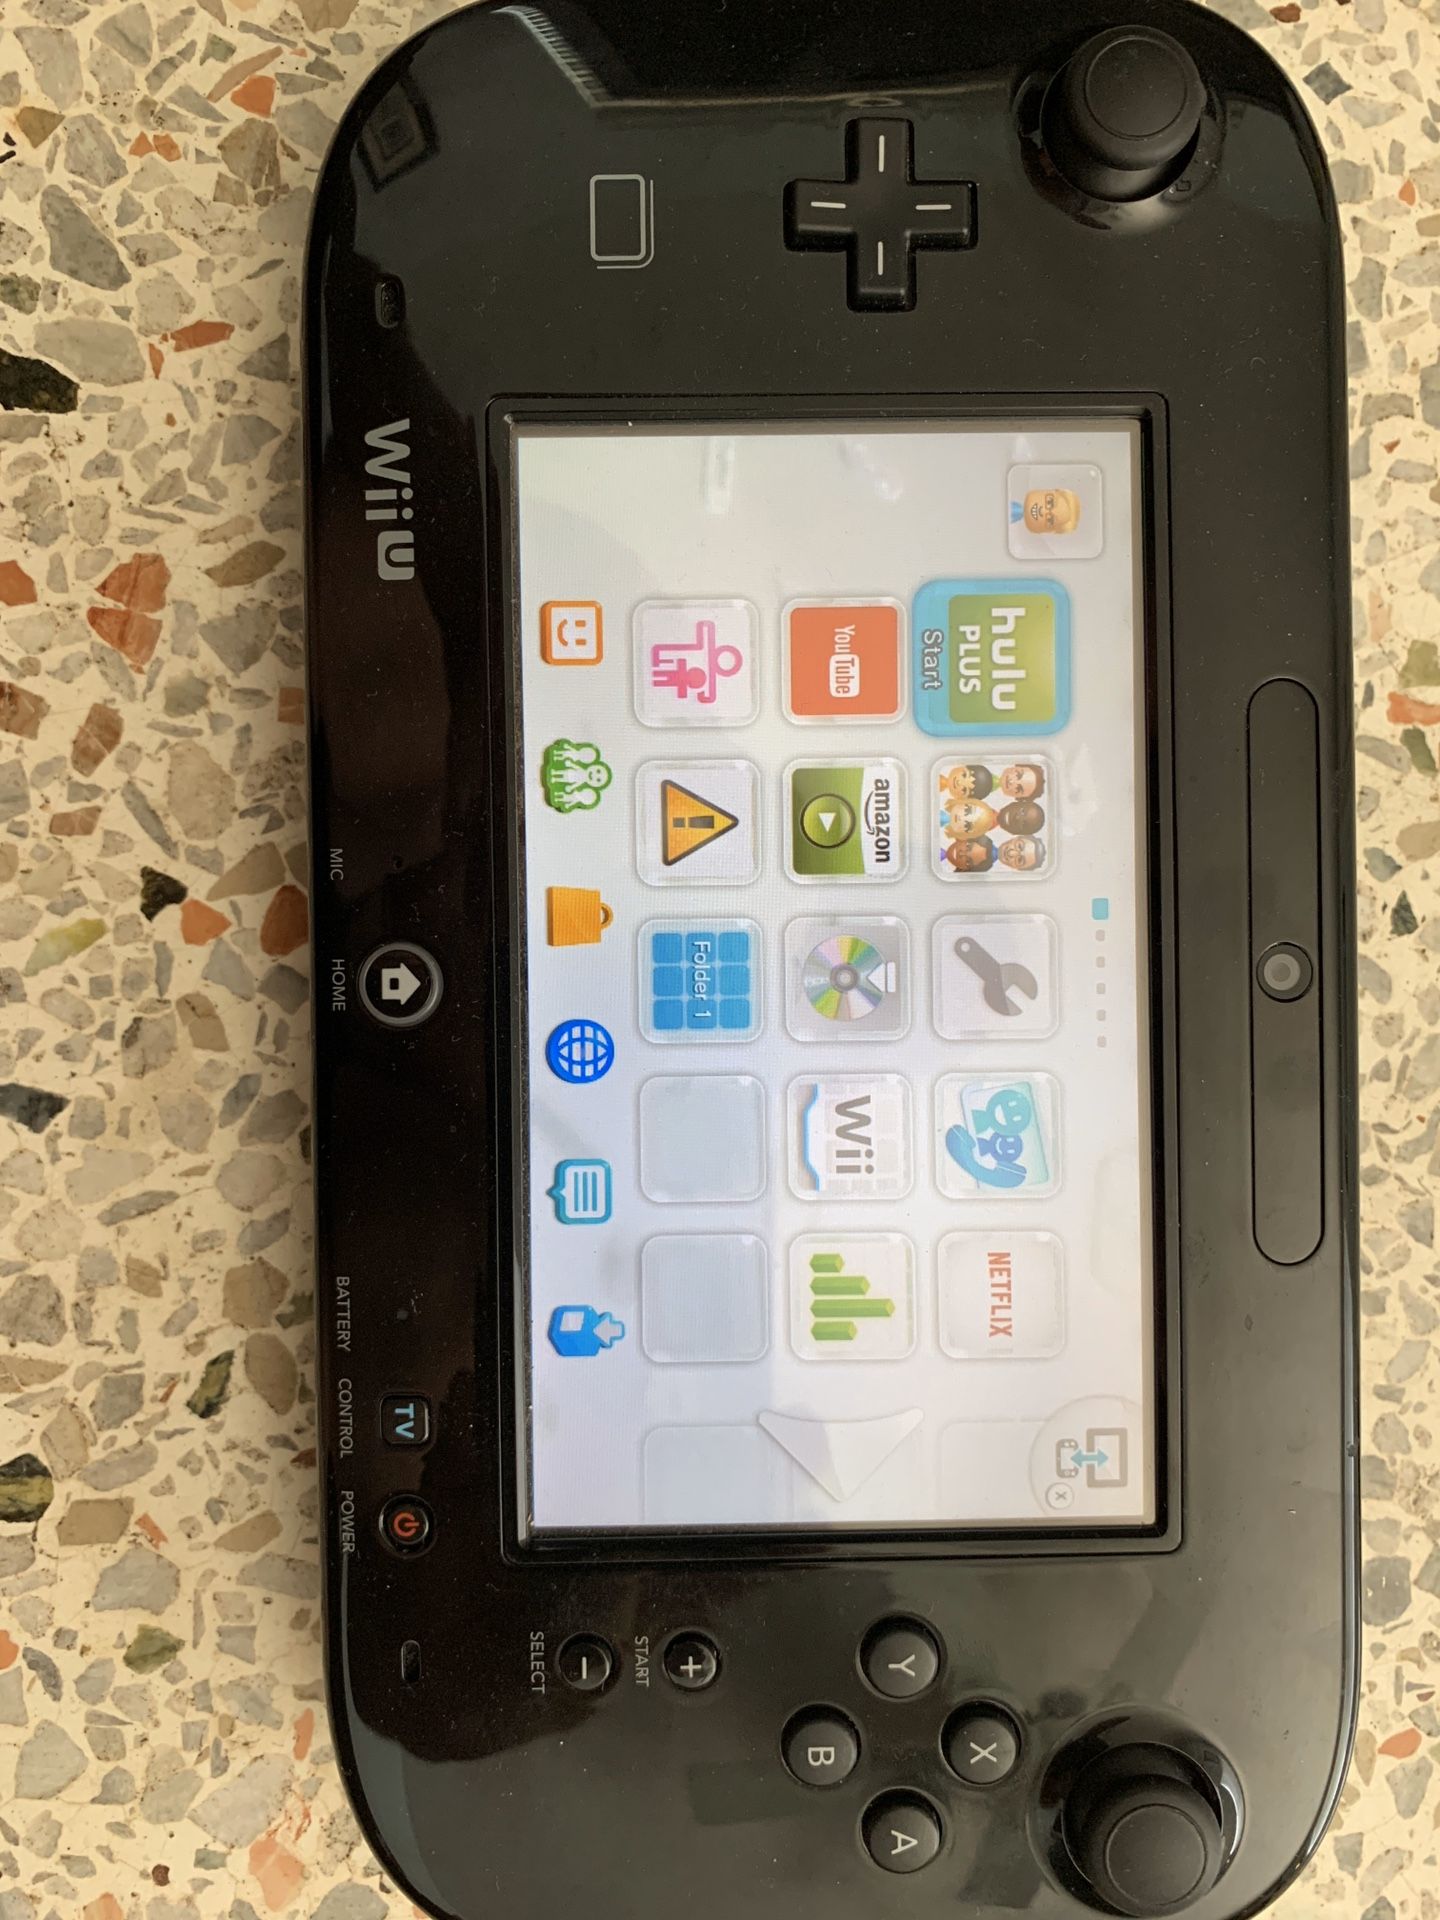 Nintendo Wii U 32GB Black Console with 6 games and accessories - $135